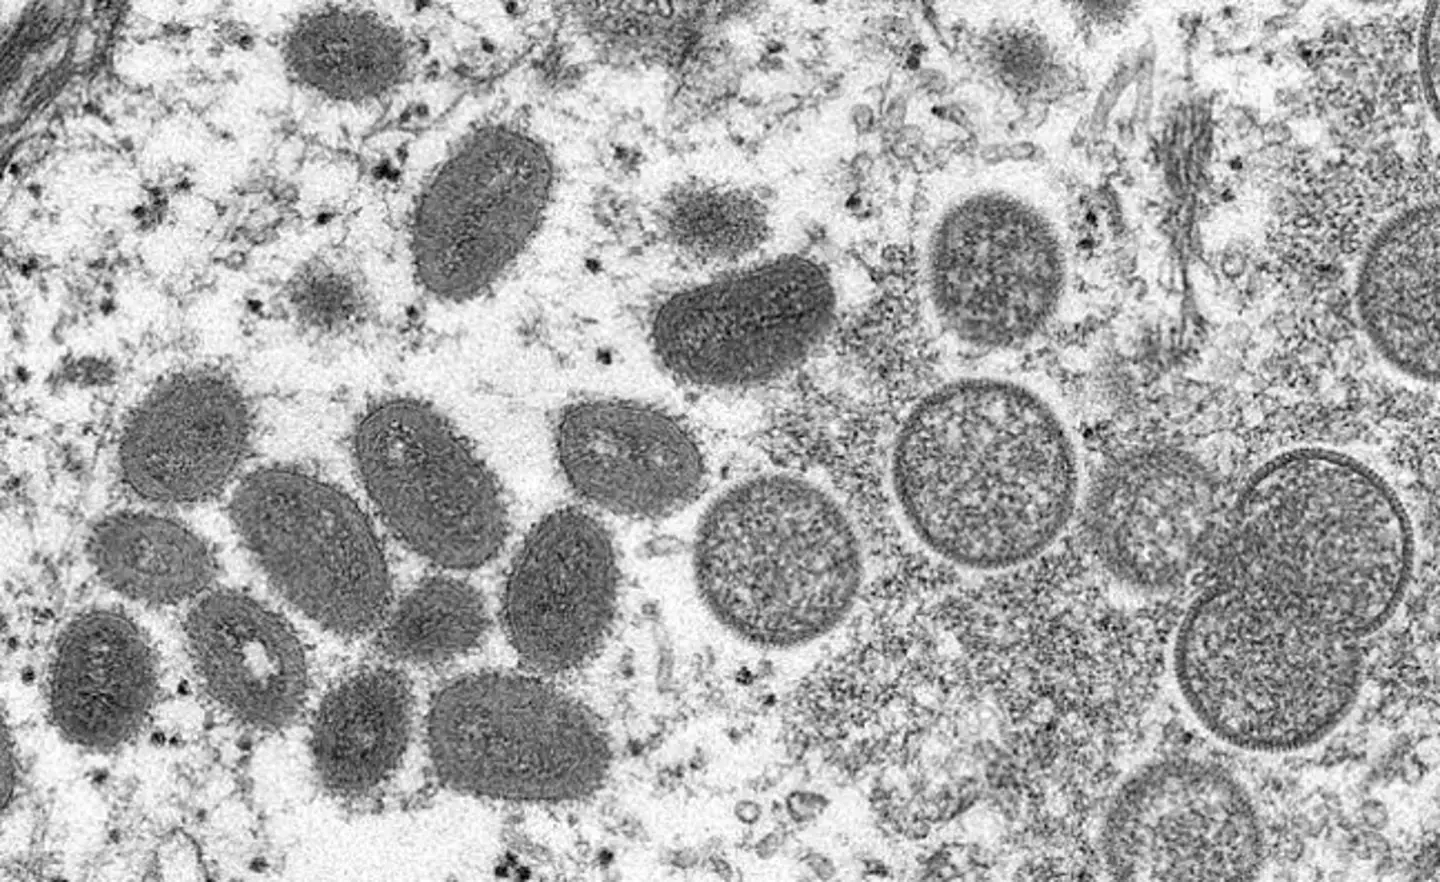 A US resident sadly died from monkeypox.